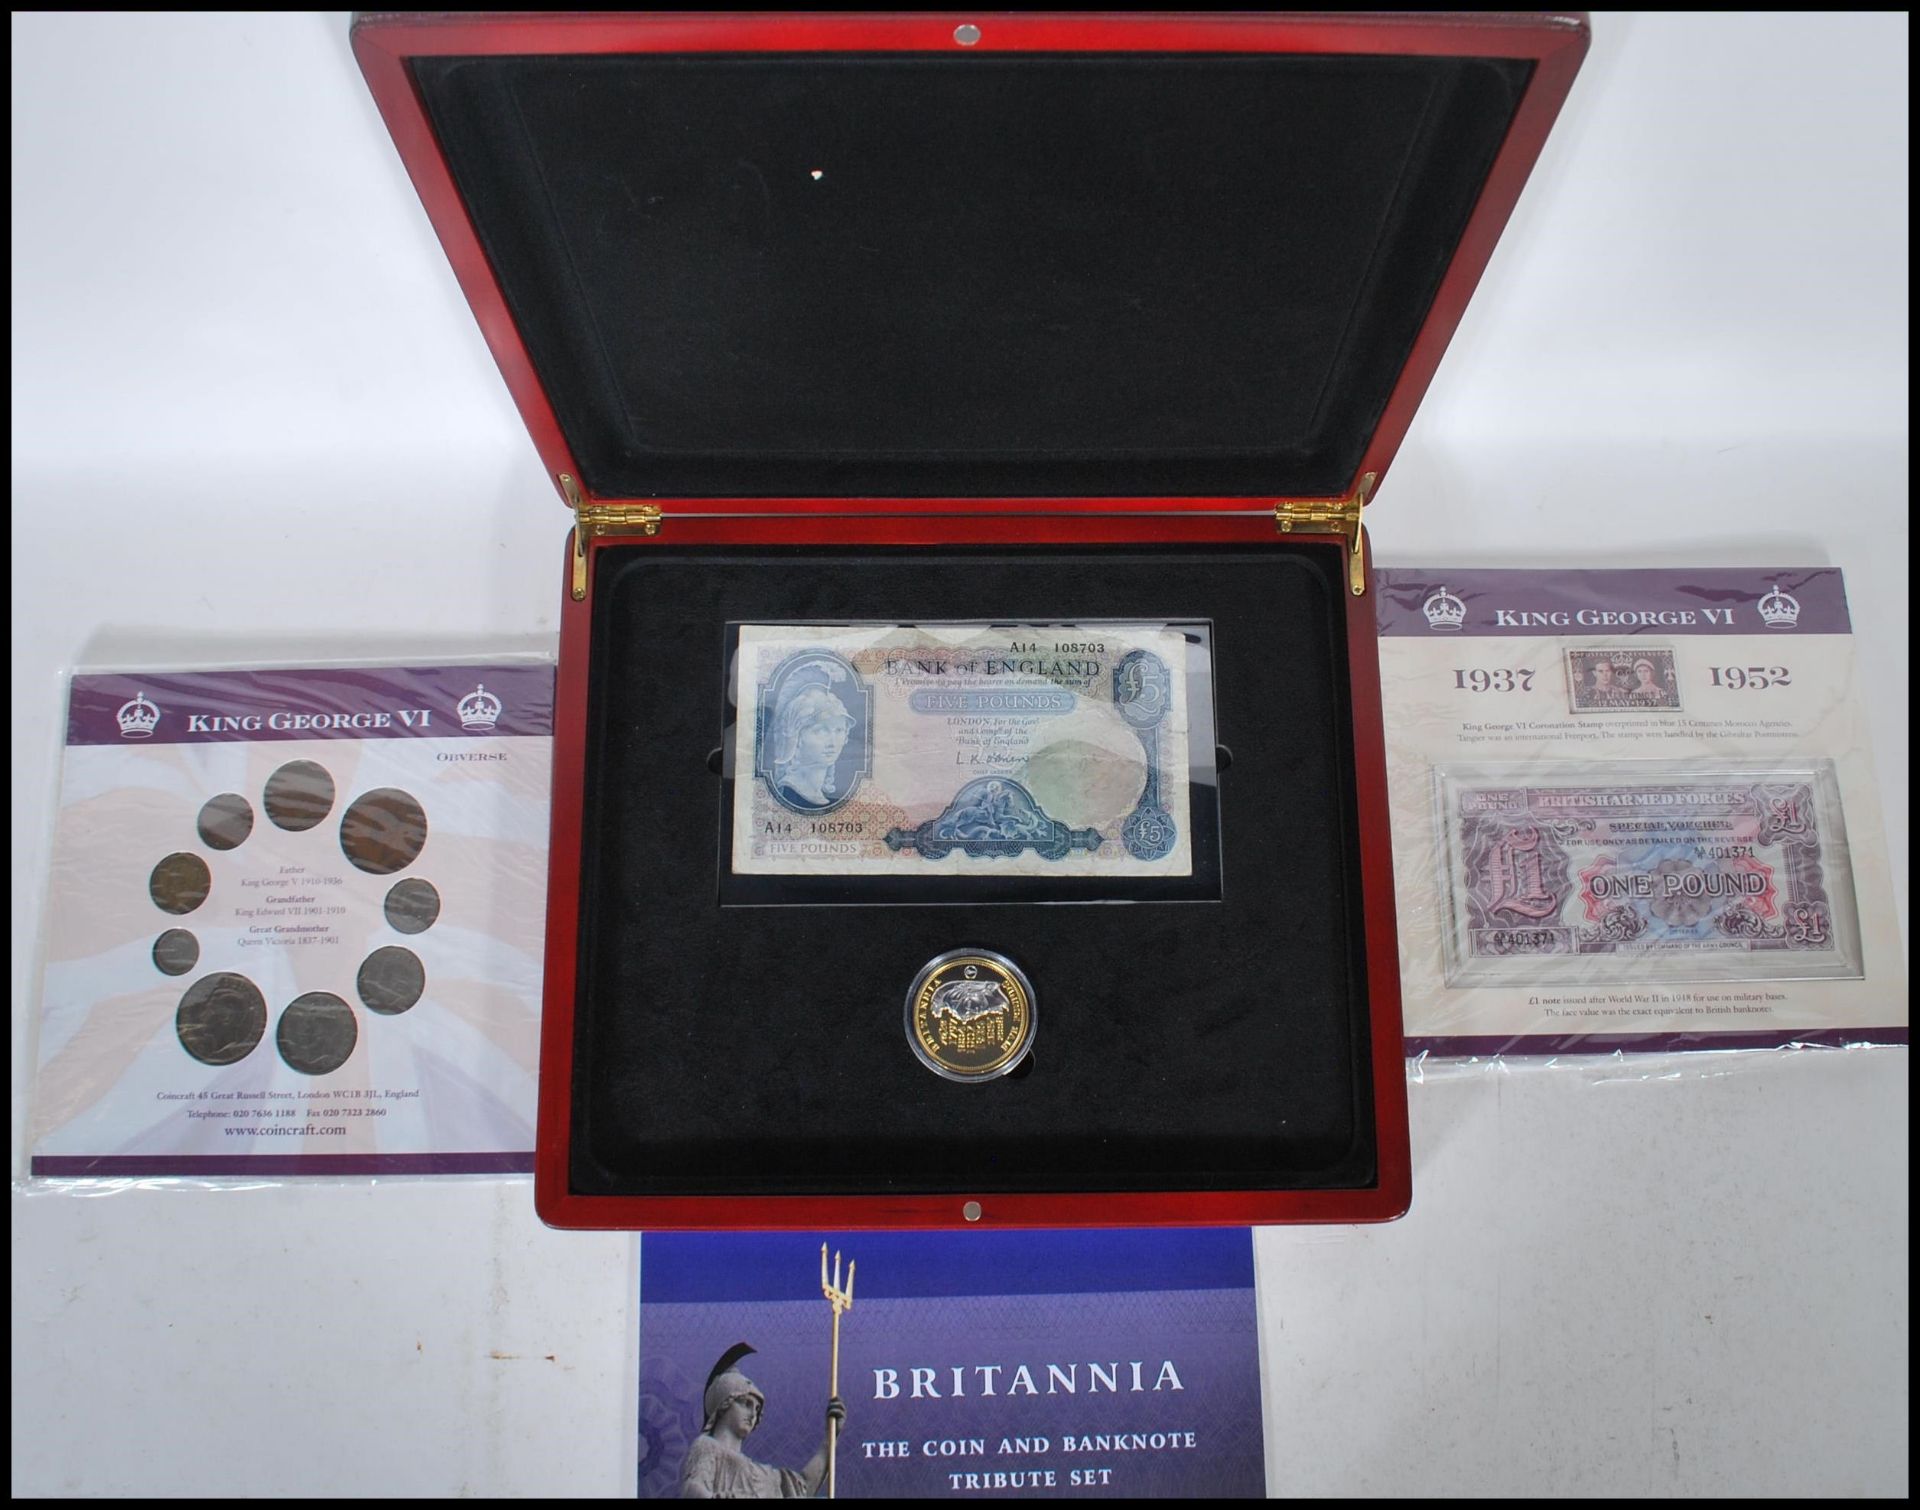 BRITANNIA THE COIN AND BANKNOTE TRIBUTE SET with a certificate, in a fitted case, blue Bank of - Image 2 of 12